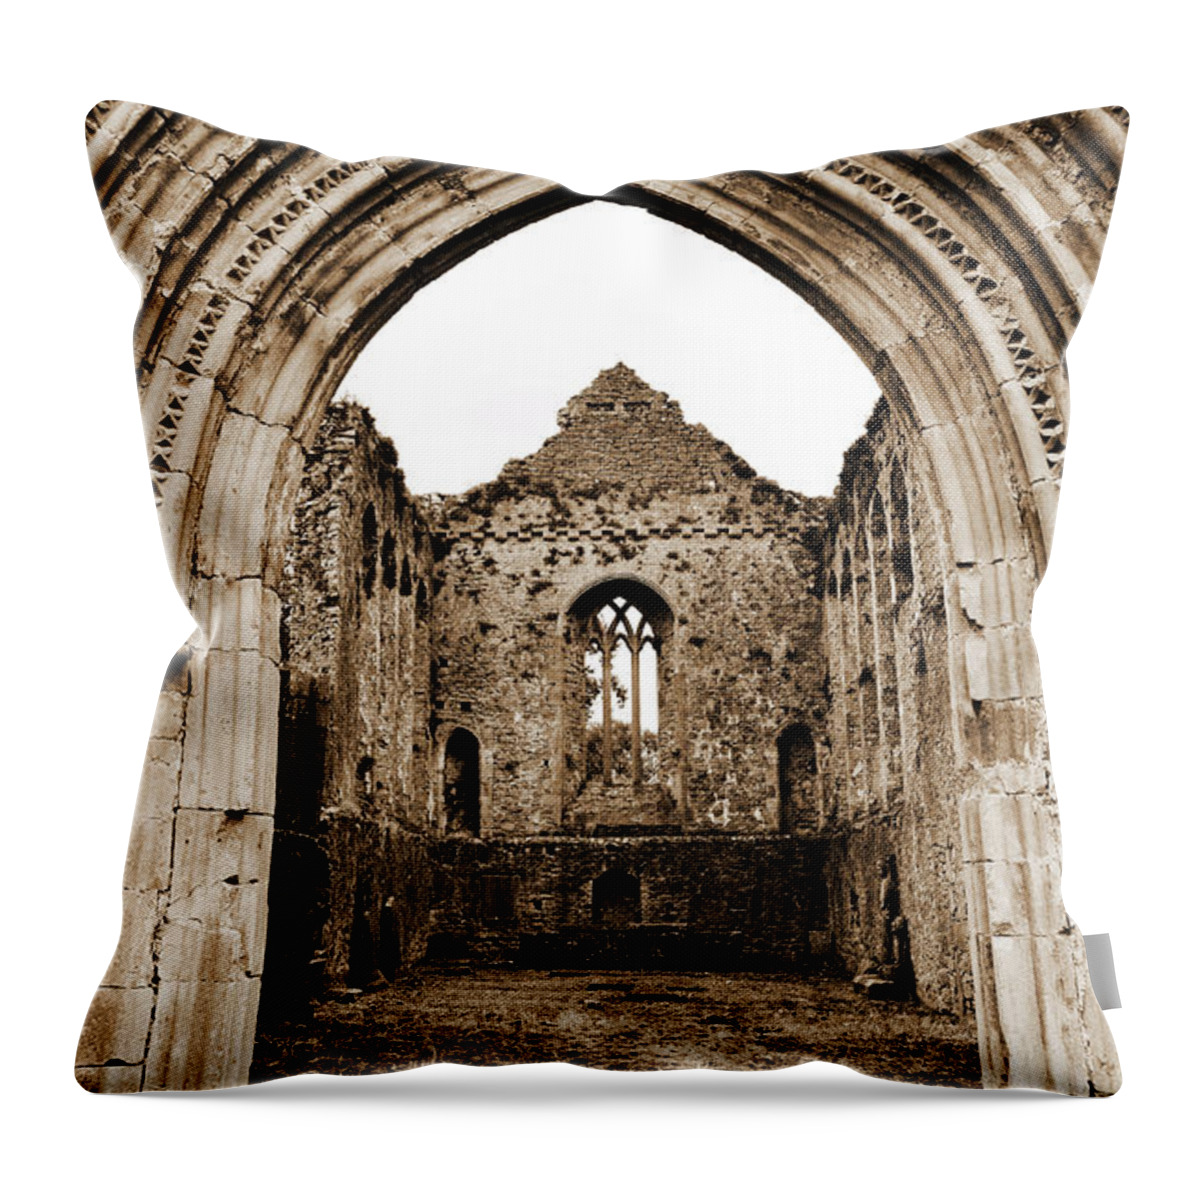 Athassel Throw Pillow featuring the photograph Athassel Priory Tipperary Ireland Medieval Ruins Decorative Arched Doorway Into Great Hall Sepia by Shawn O'Brien